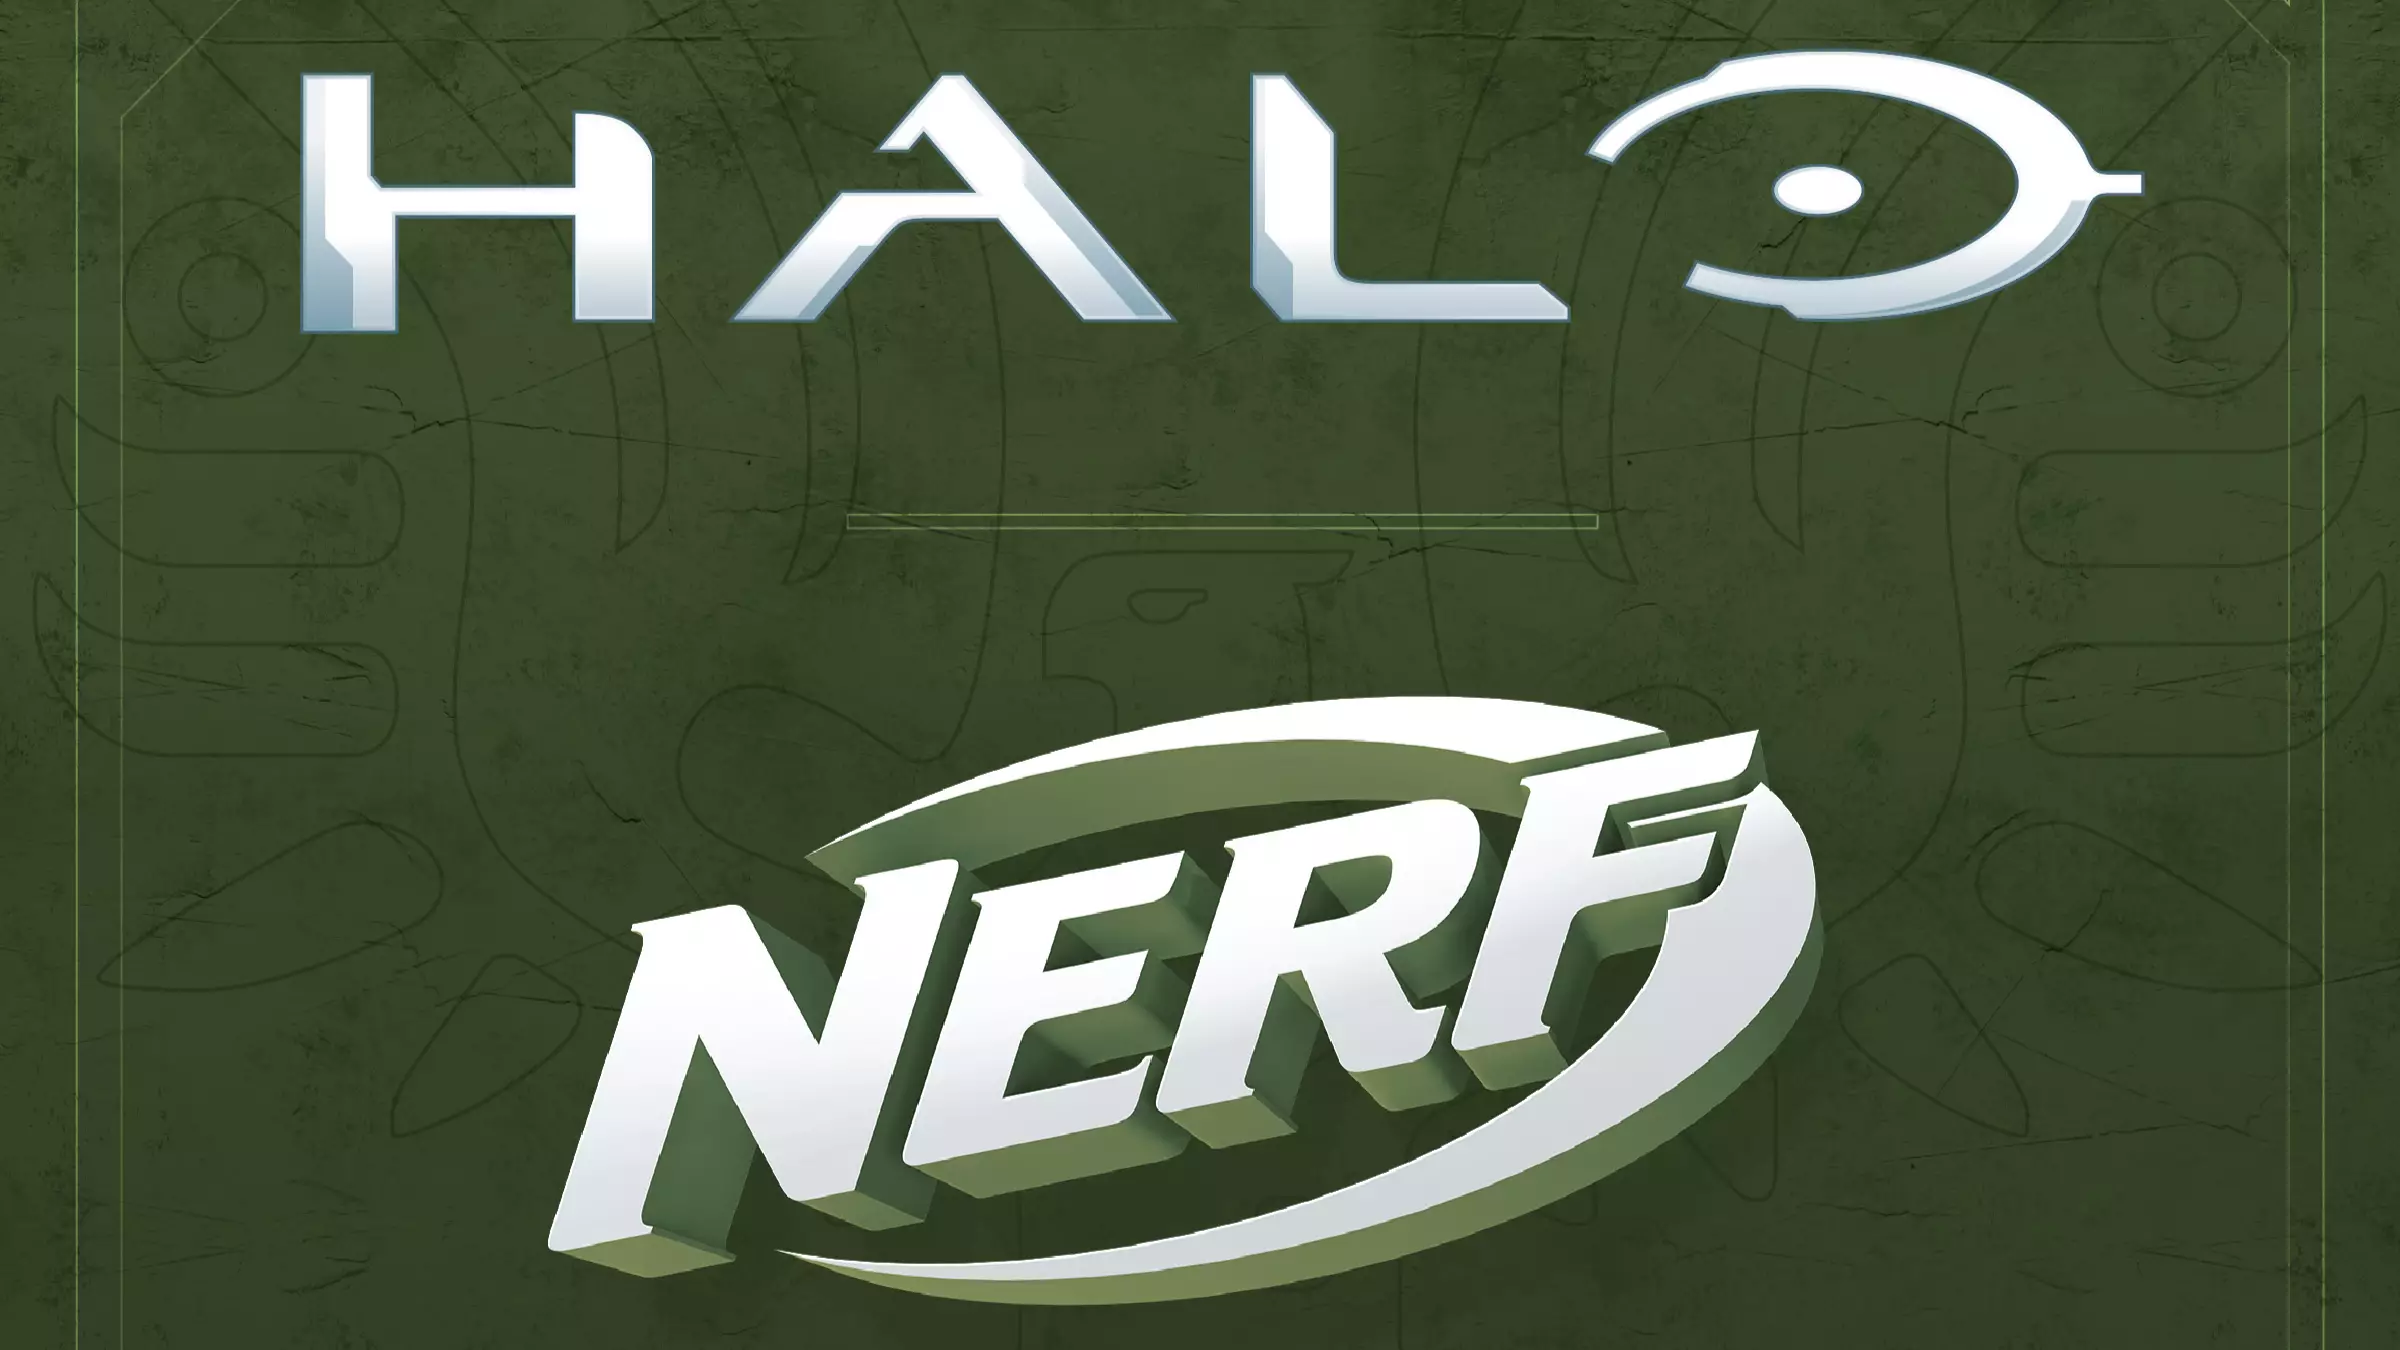 Hasbro Is Releasing A New Range Of Nerf Guns Inspired By Halo